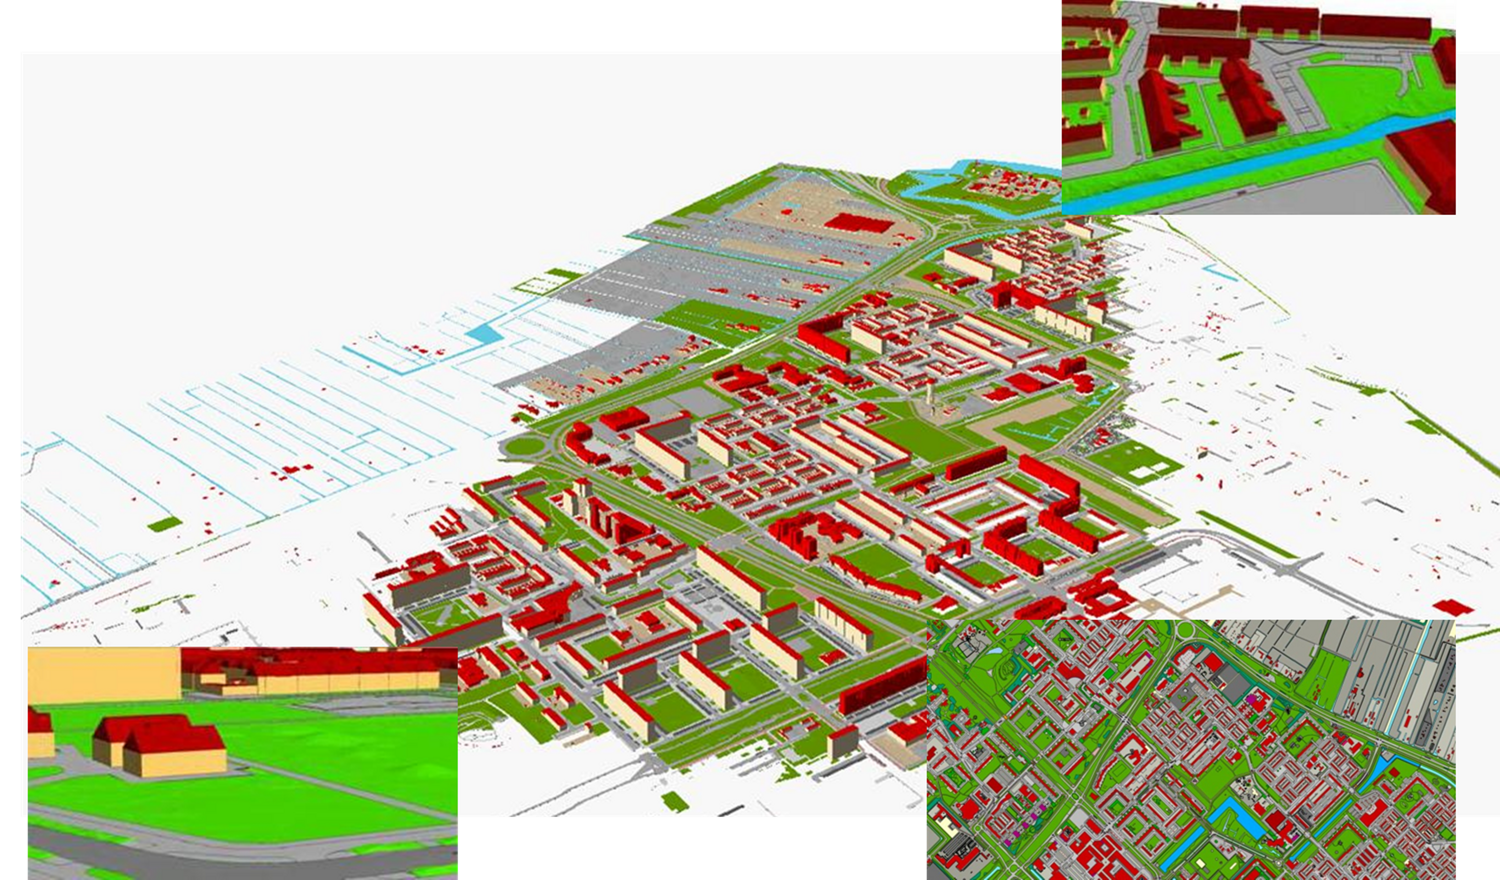 3D models are the foundation for flood risk modelling and solar panel suitability analyses 